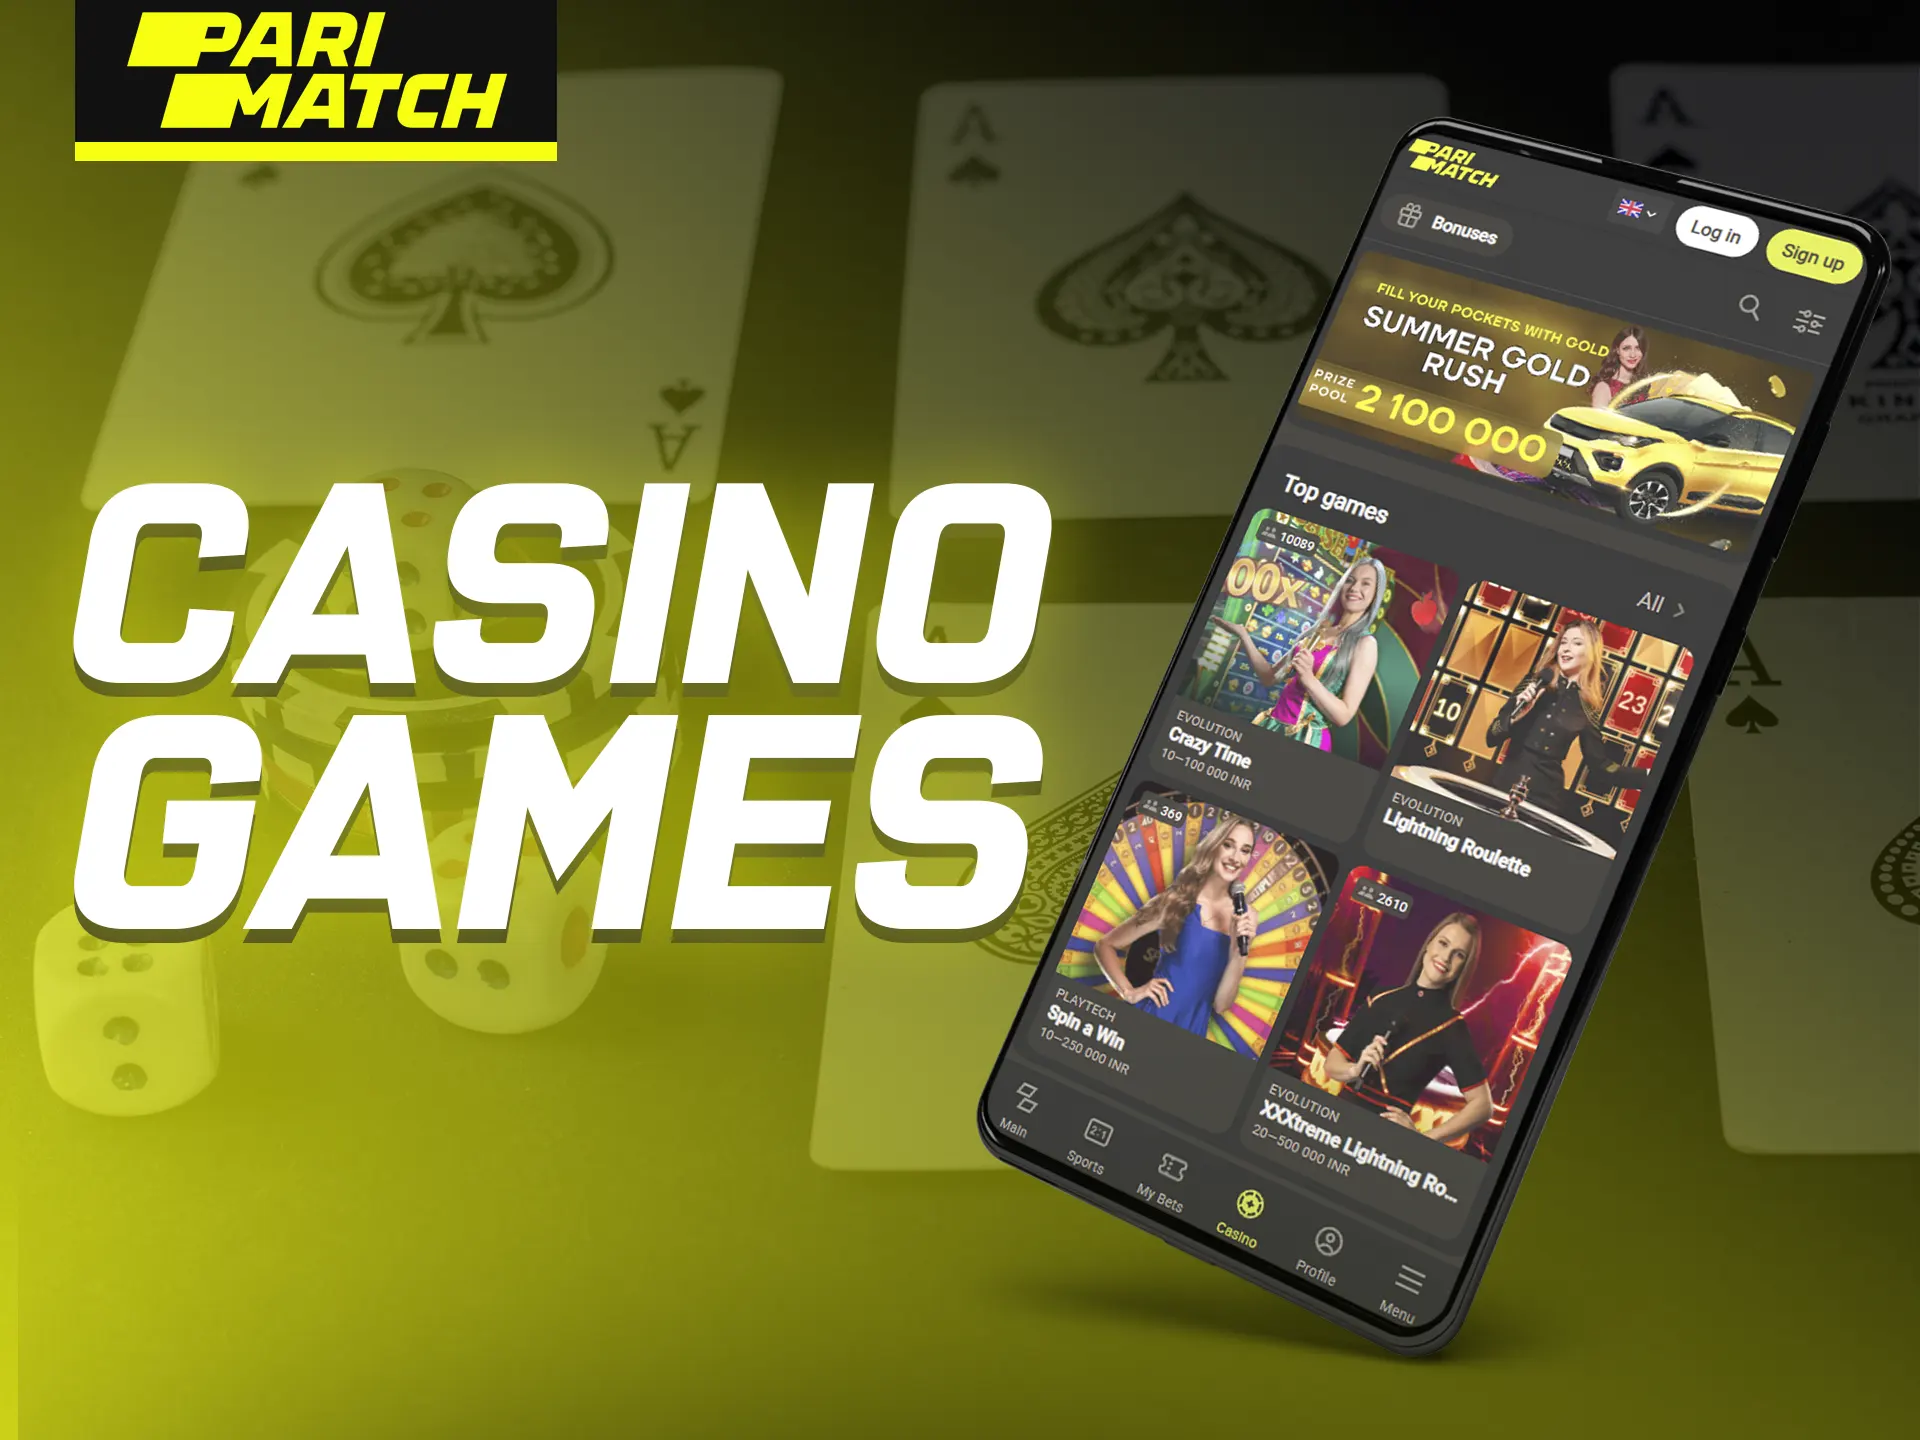 The Parimatch app provides a wide variety of casino games for gamers to wager on. 